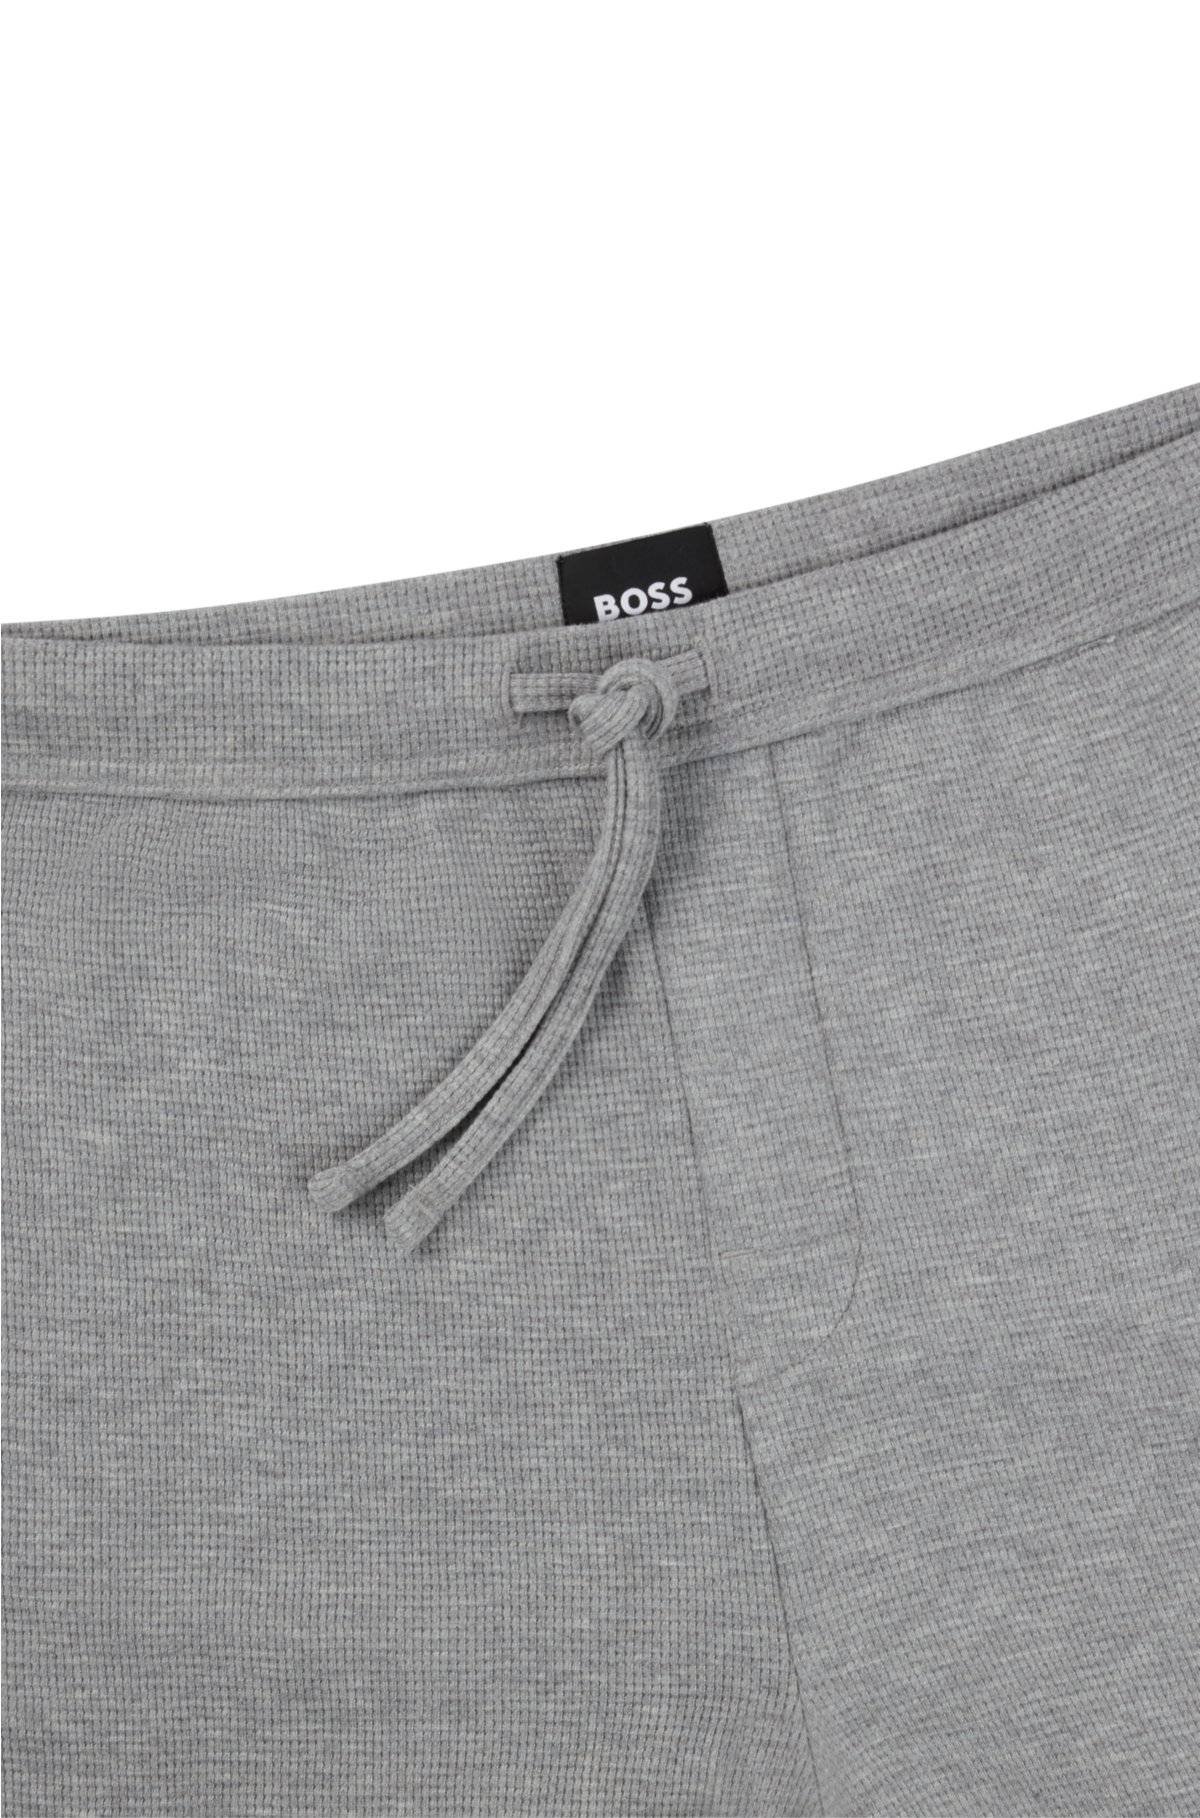 BOSS logo embroidered bottoms - Pajama with